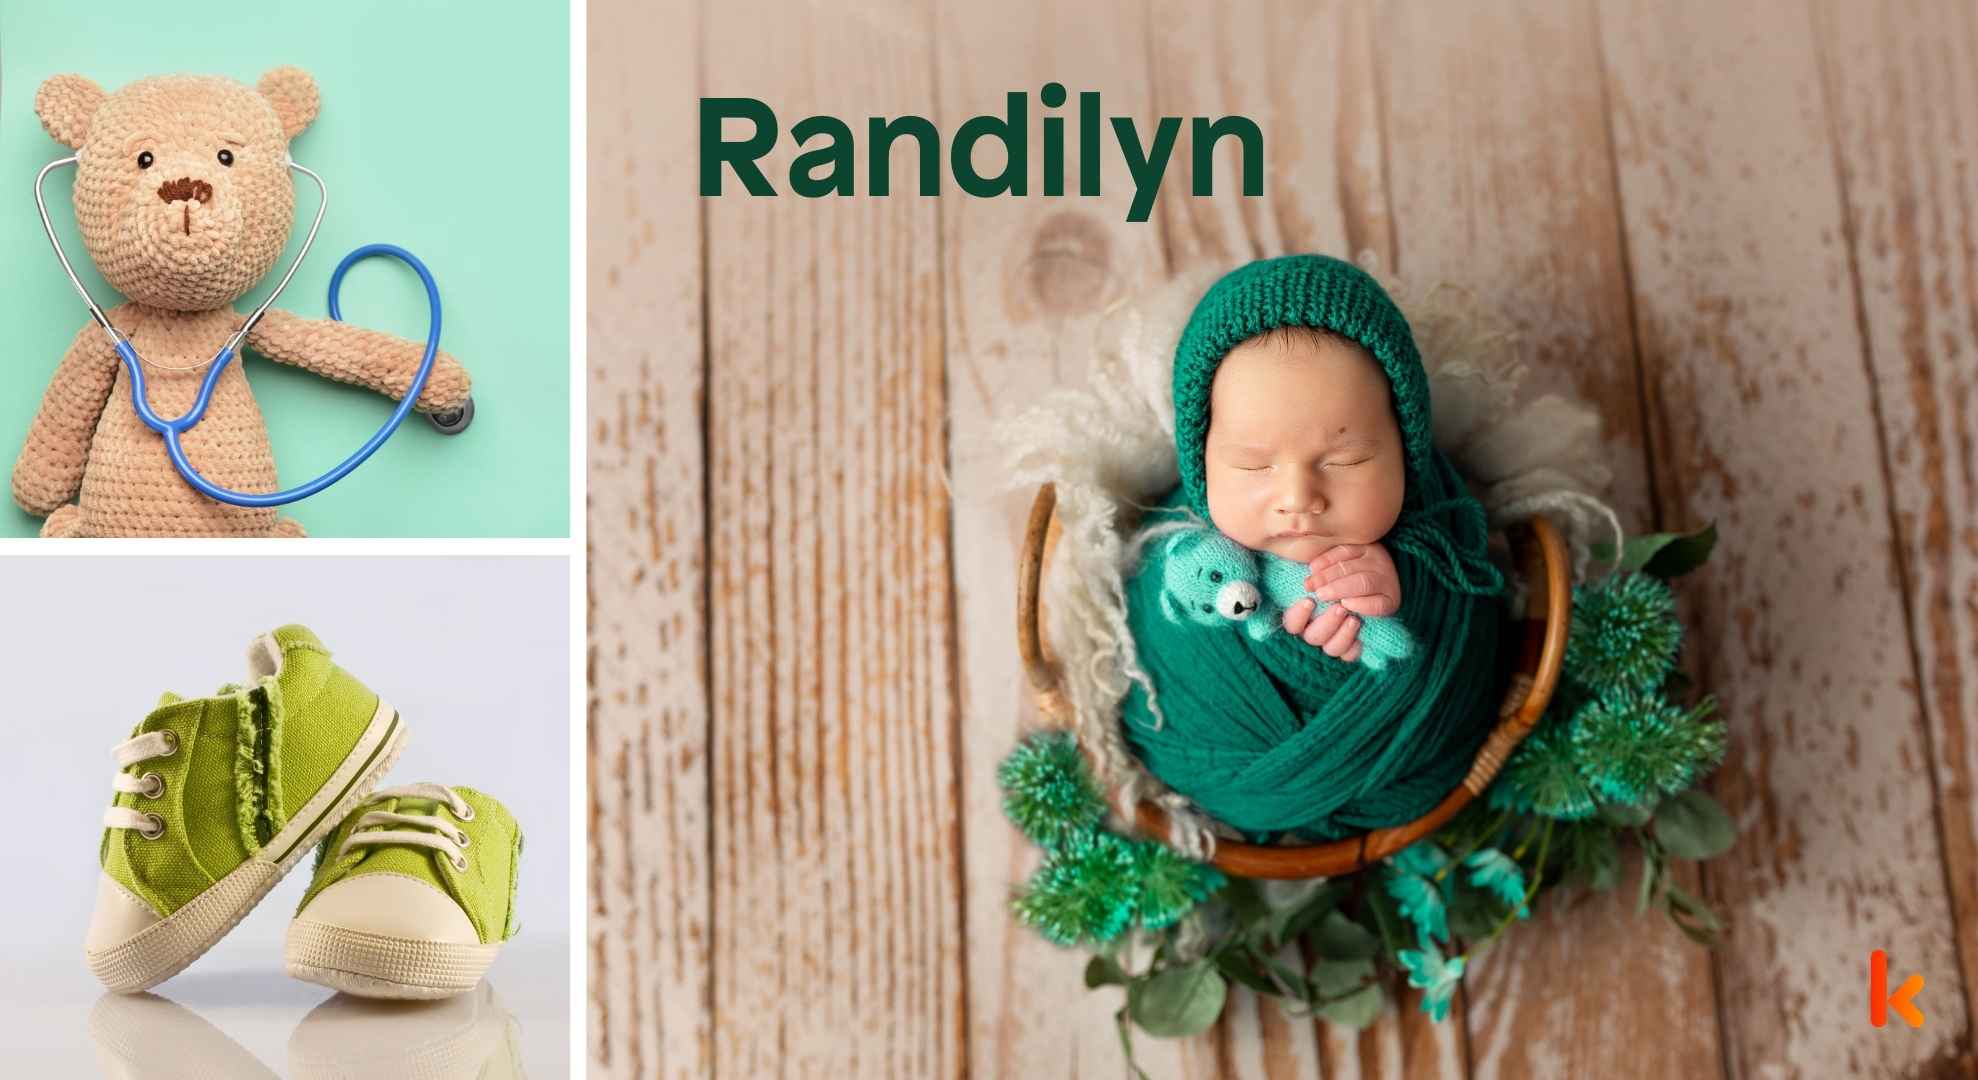 Meaning of the name Randilyn